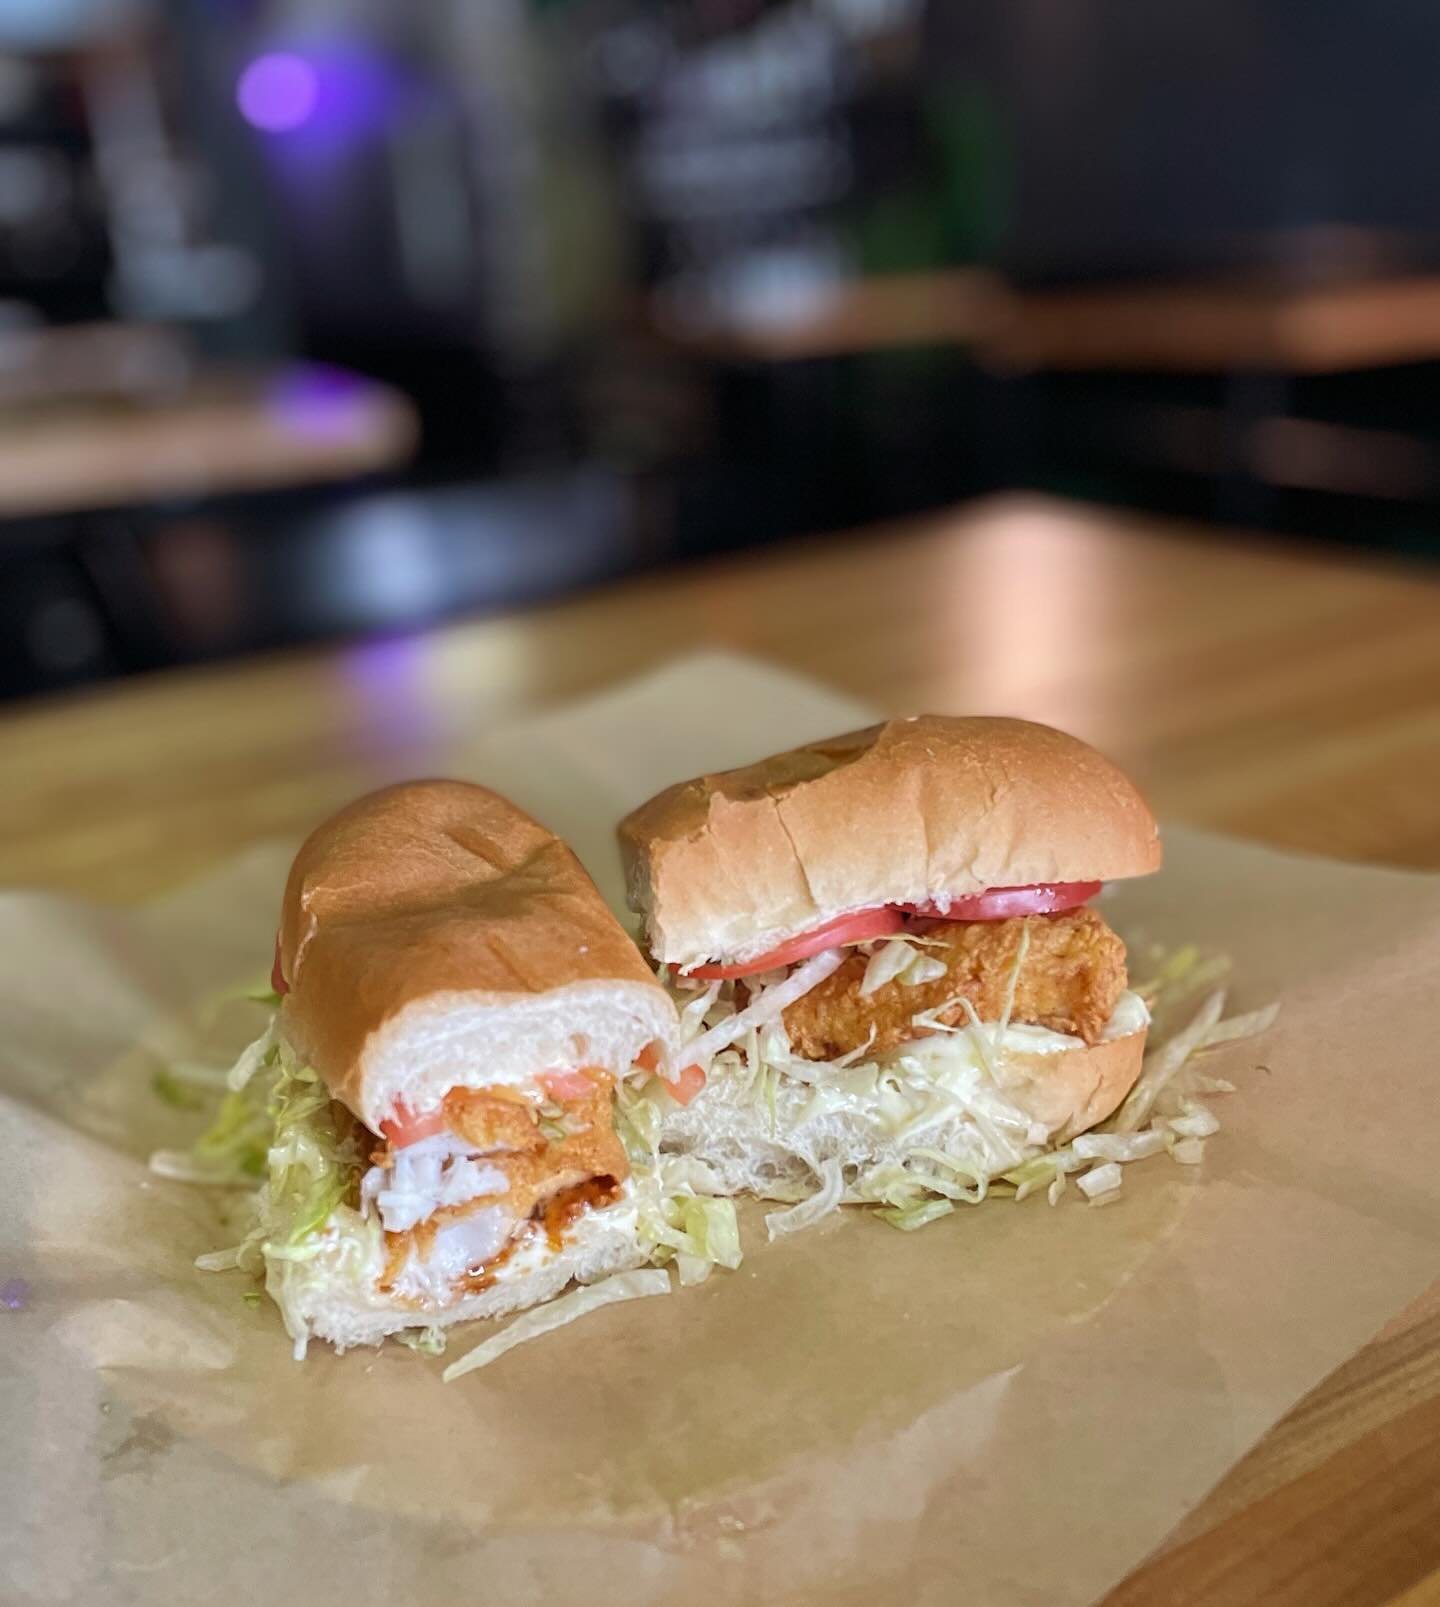 Have you seen our new Lunch Specials? From 11-3pm enjoy our Fried Catfish Po&rsquo; Boy, Fried Chicken Banh Mi, Cajun Popcorn Chicken or Blackened Catfish Combos, Fried Shrimp Po&rsquo; Boy and today we&rsquo;ll have Blackened Fried Soft Shell Crab P